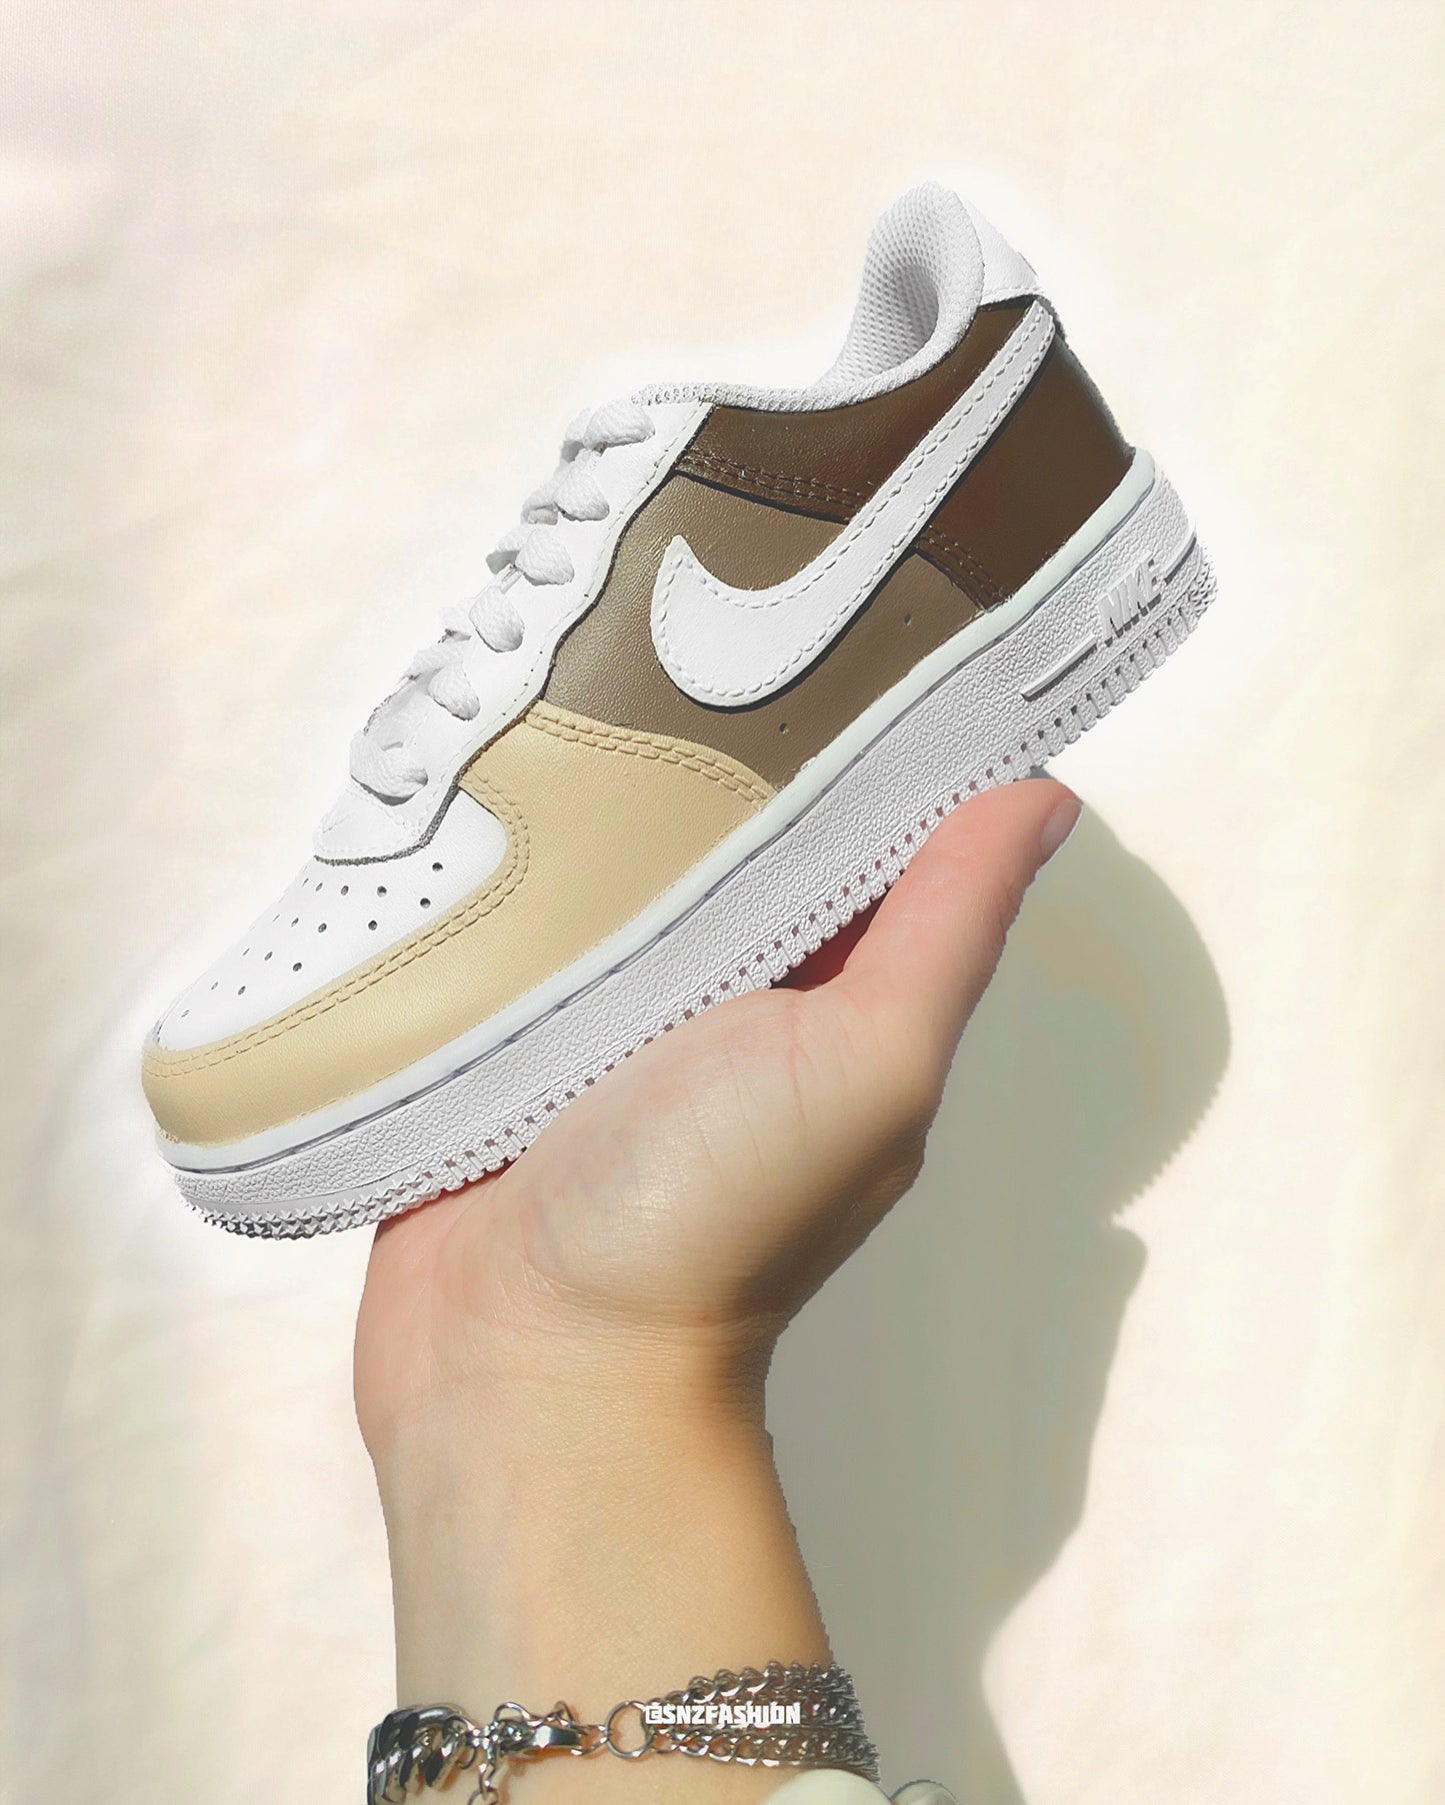 TEDDY DESIGN NIKE AIR FORCE 1'S (BABY/KIDS/ADULTS)